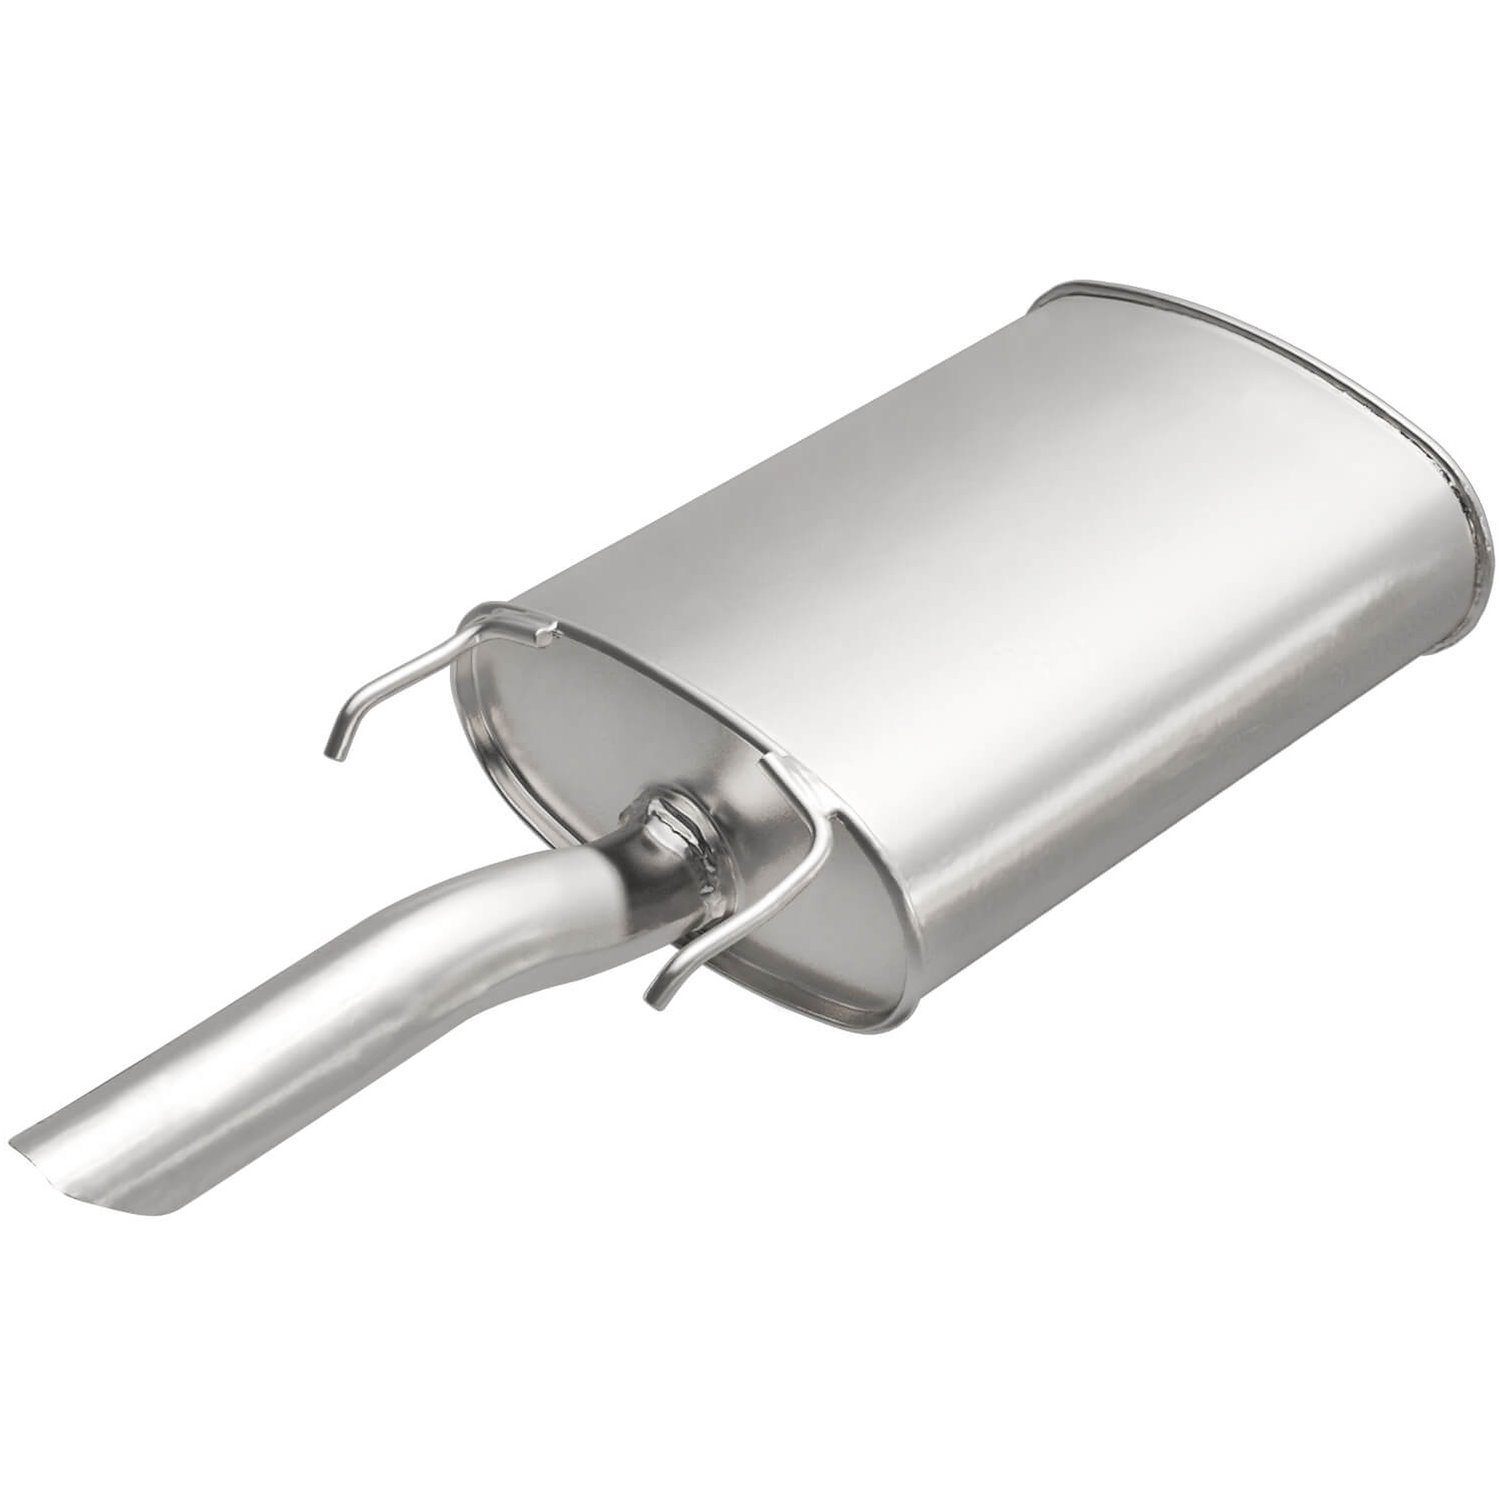 Direct-Fit Exhaust Muffler, 2006-2011 Chevy Impala/Monte Carlo